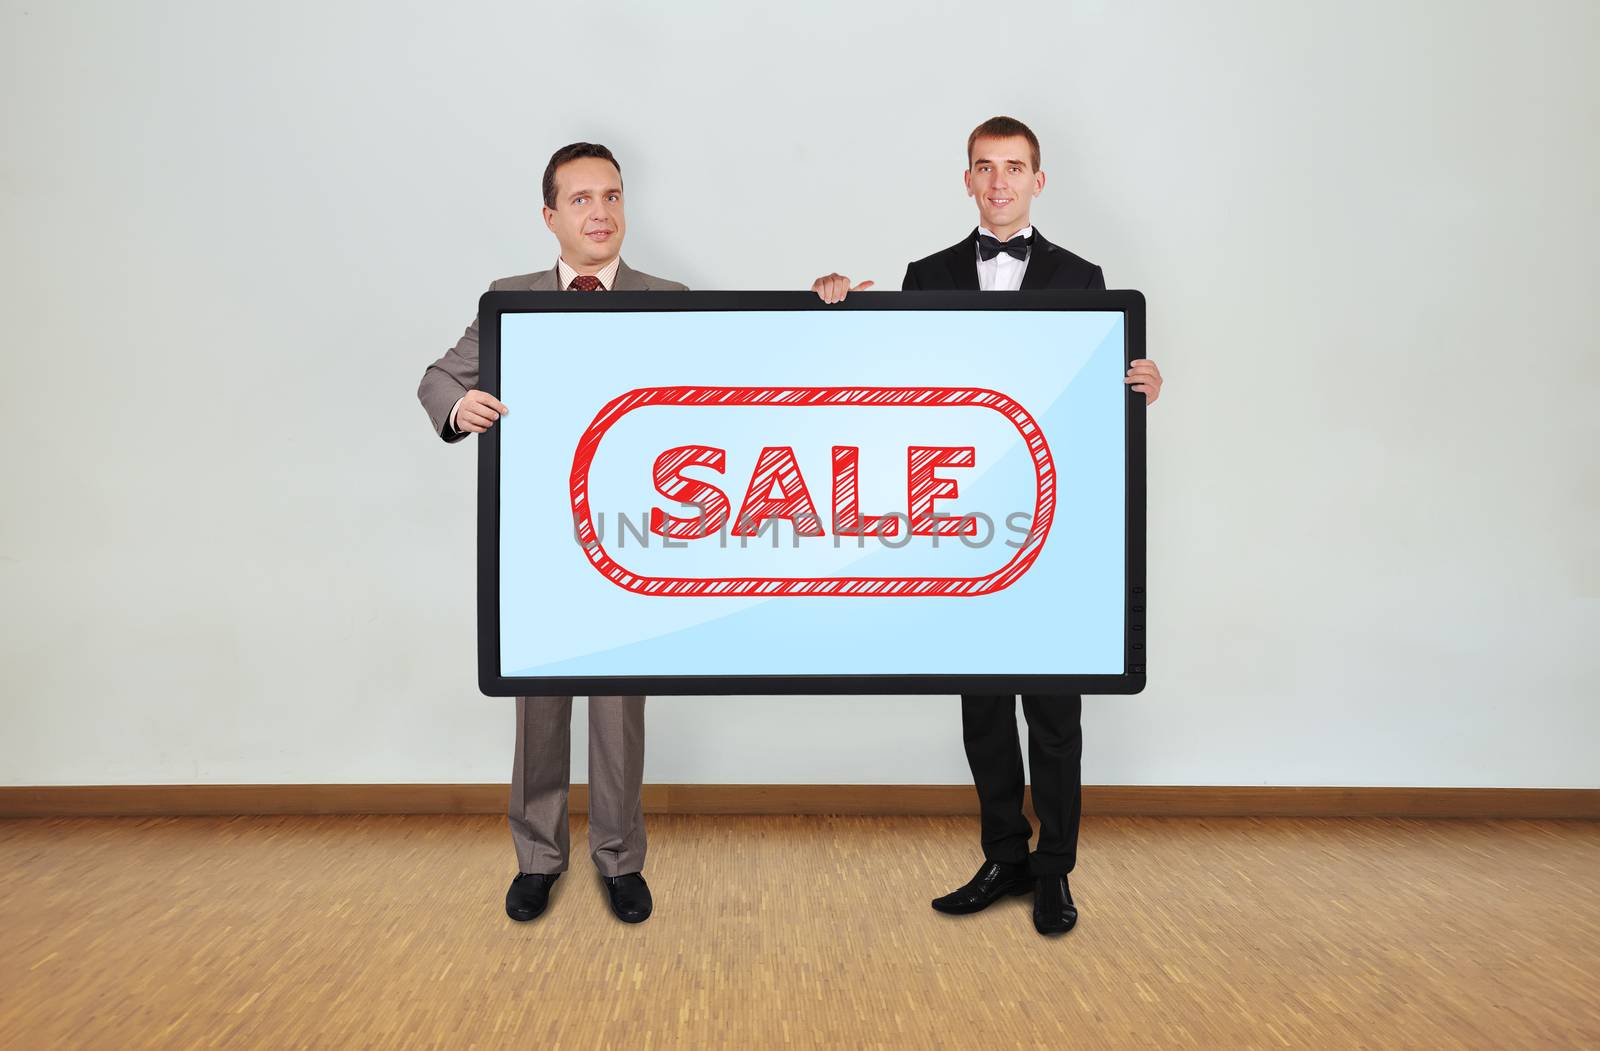 two businessman in room holding plasma panel with sale